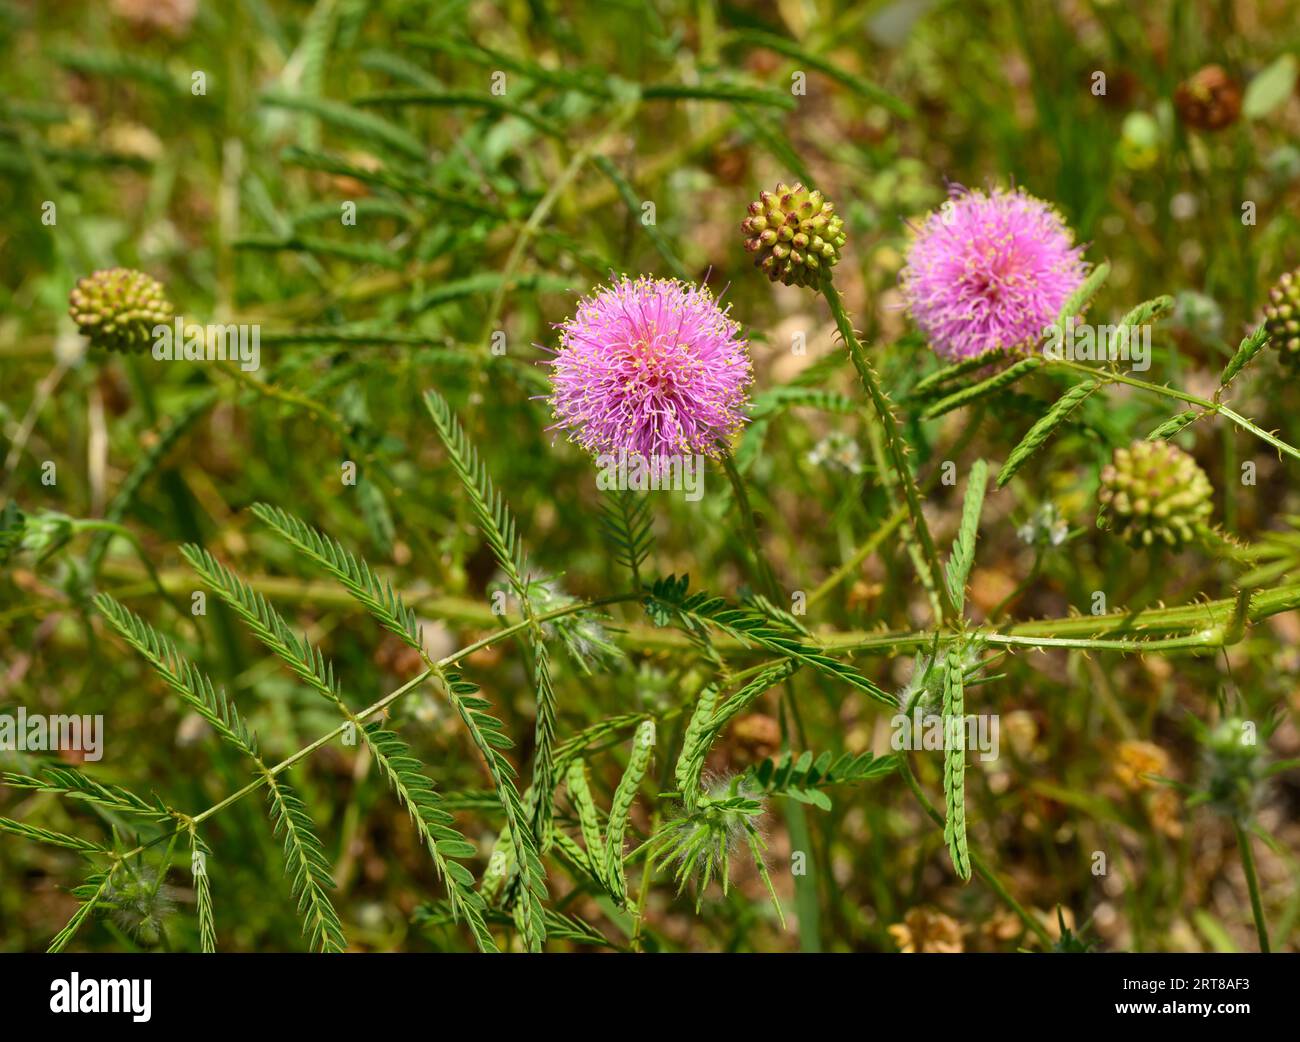 Nuttall's sensitive briar with its pink ball-shaped bloom and prickly vines Stock Photo